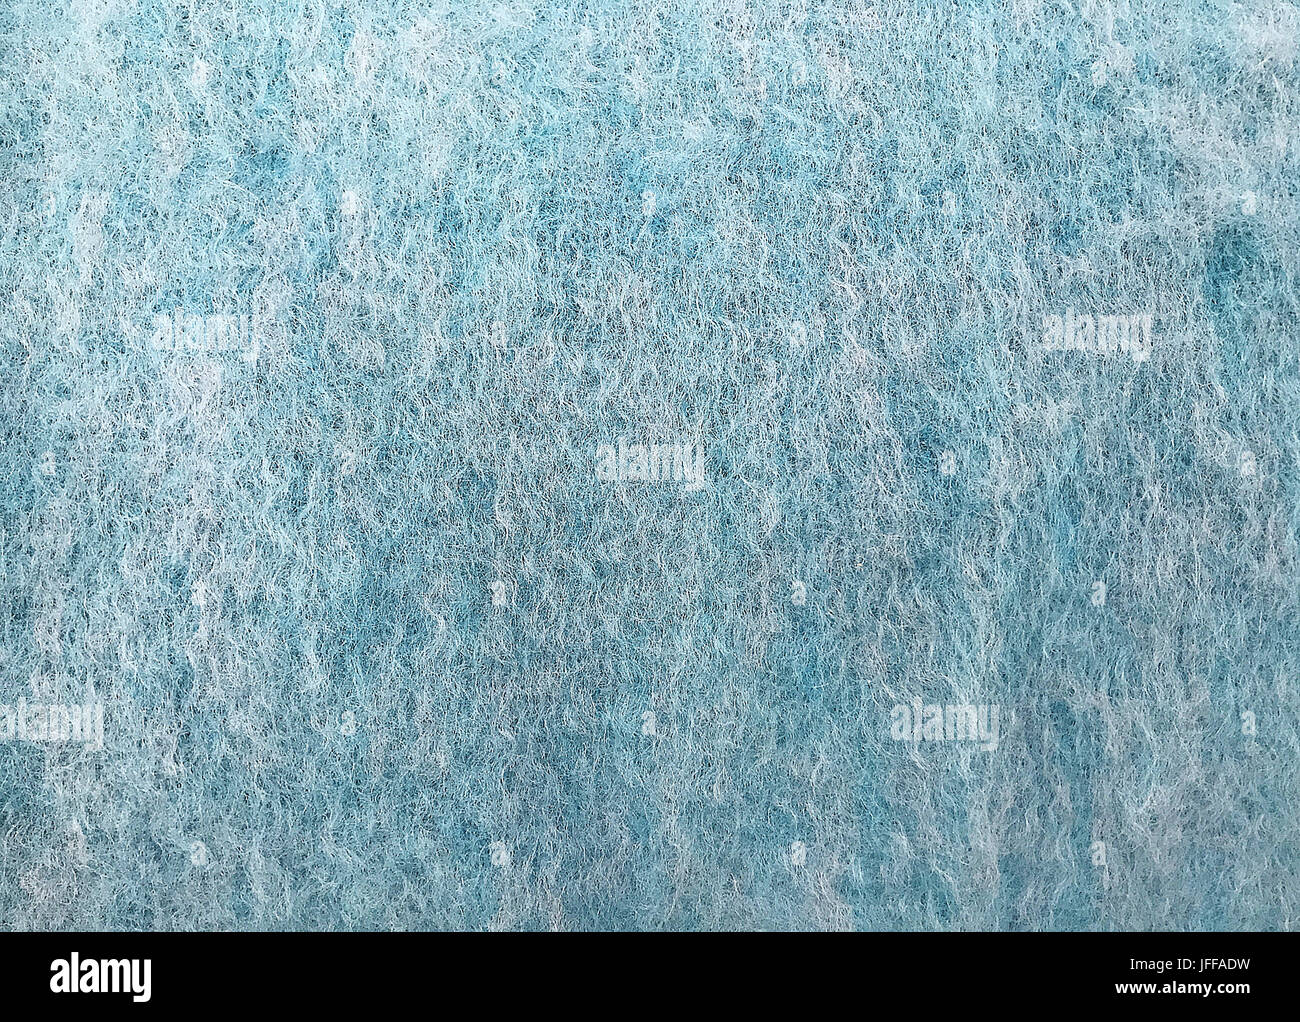 Alpaca and mohair wool as a texture Stock Photo